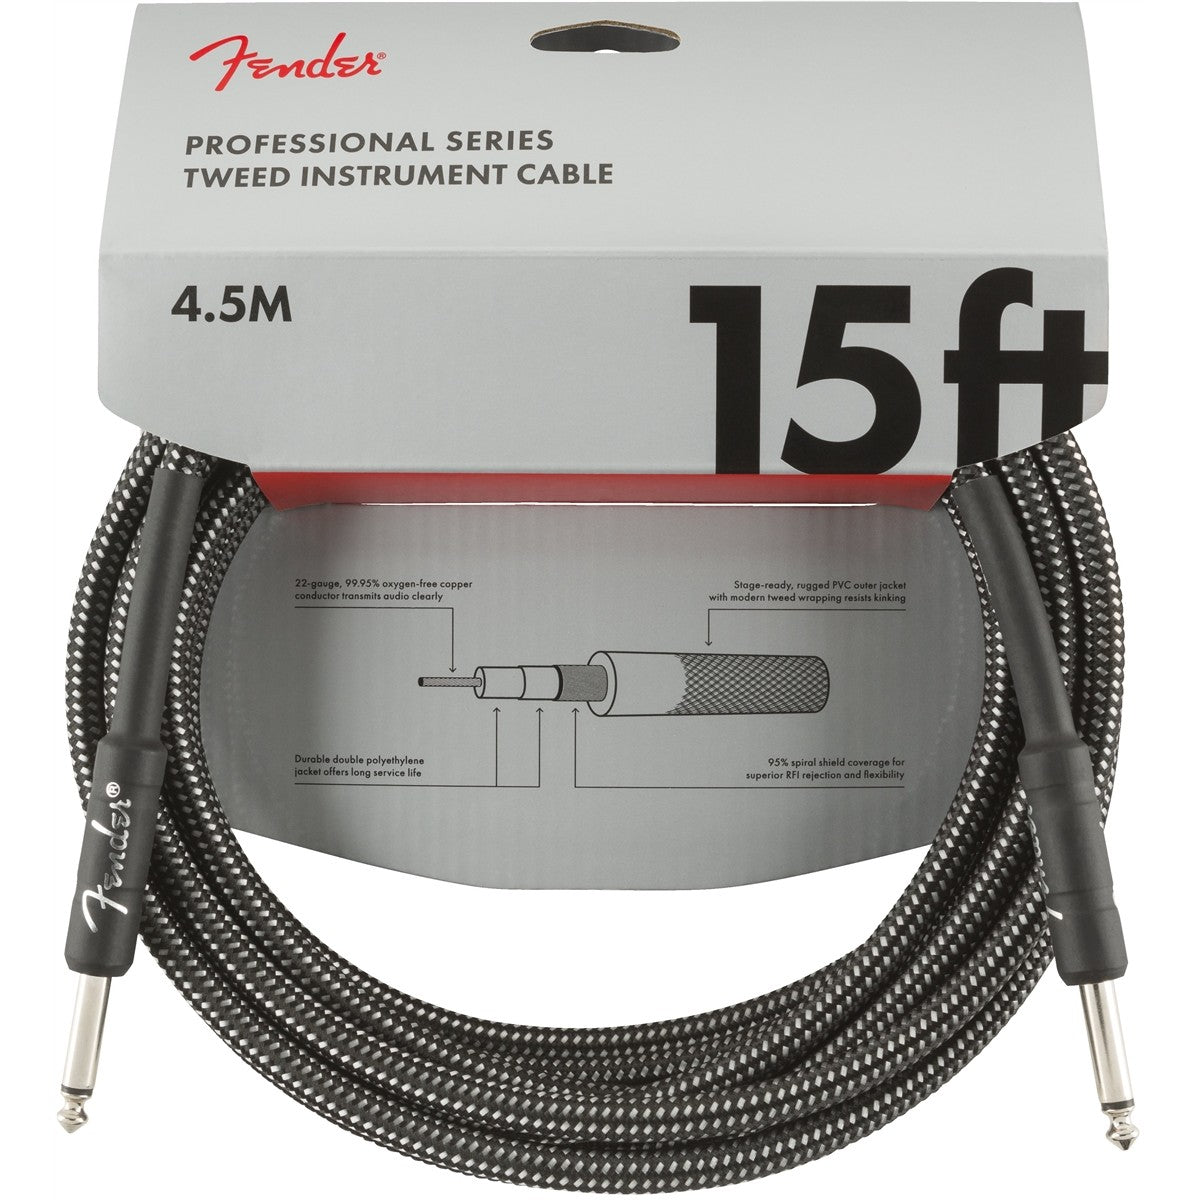 Dây Cáp Kết Nối Fender Professional Series Tweed Instrument Cable - Việt Music